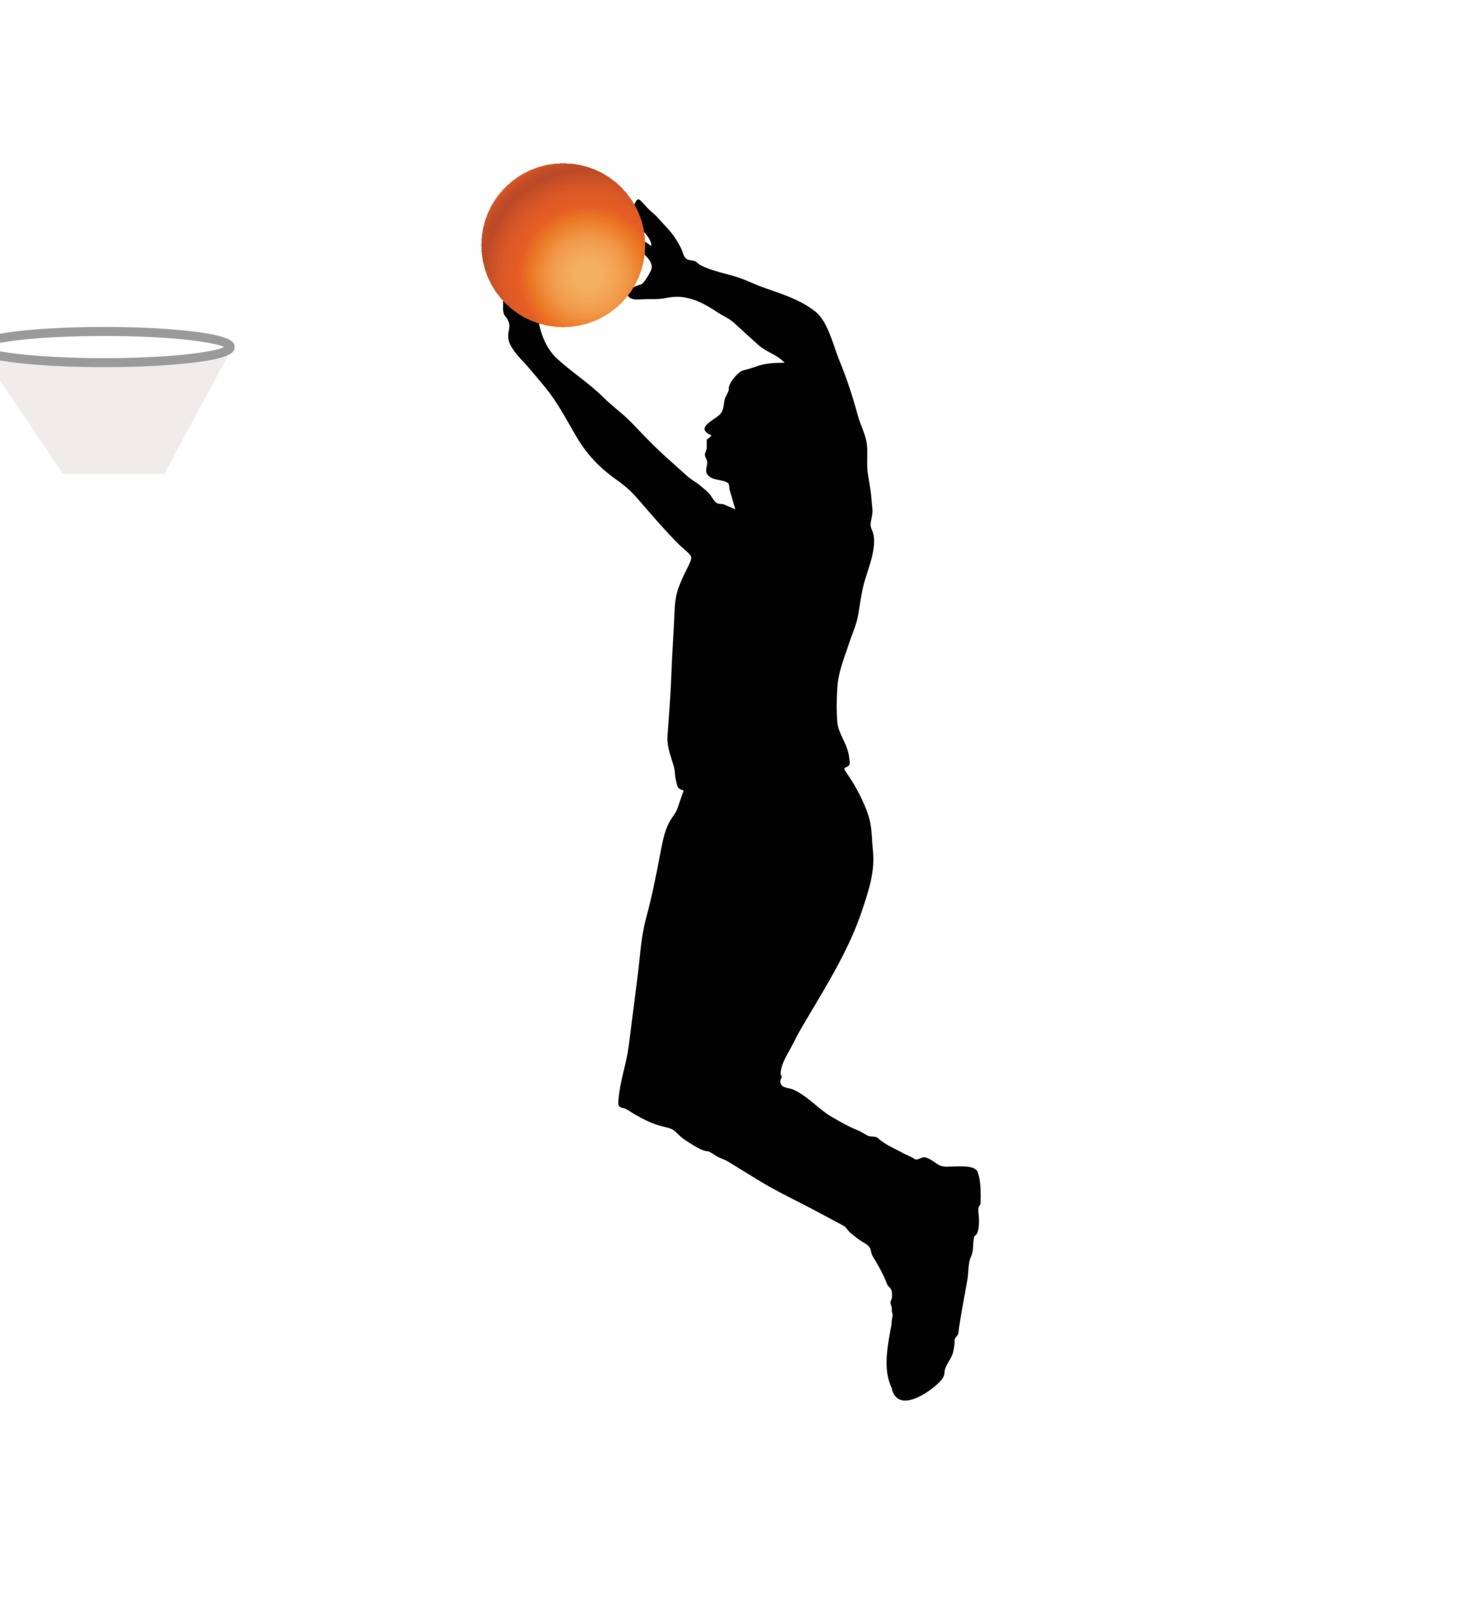 basketball player by Istanbul2009